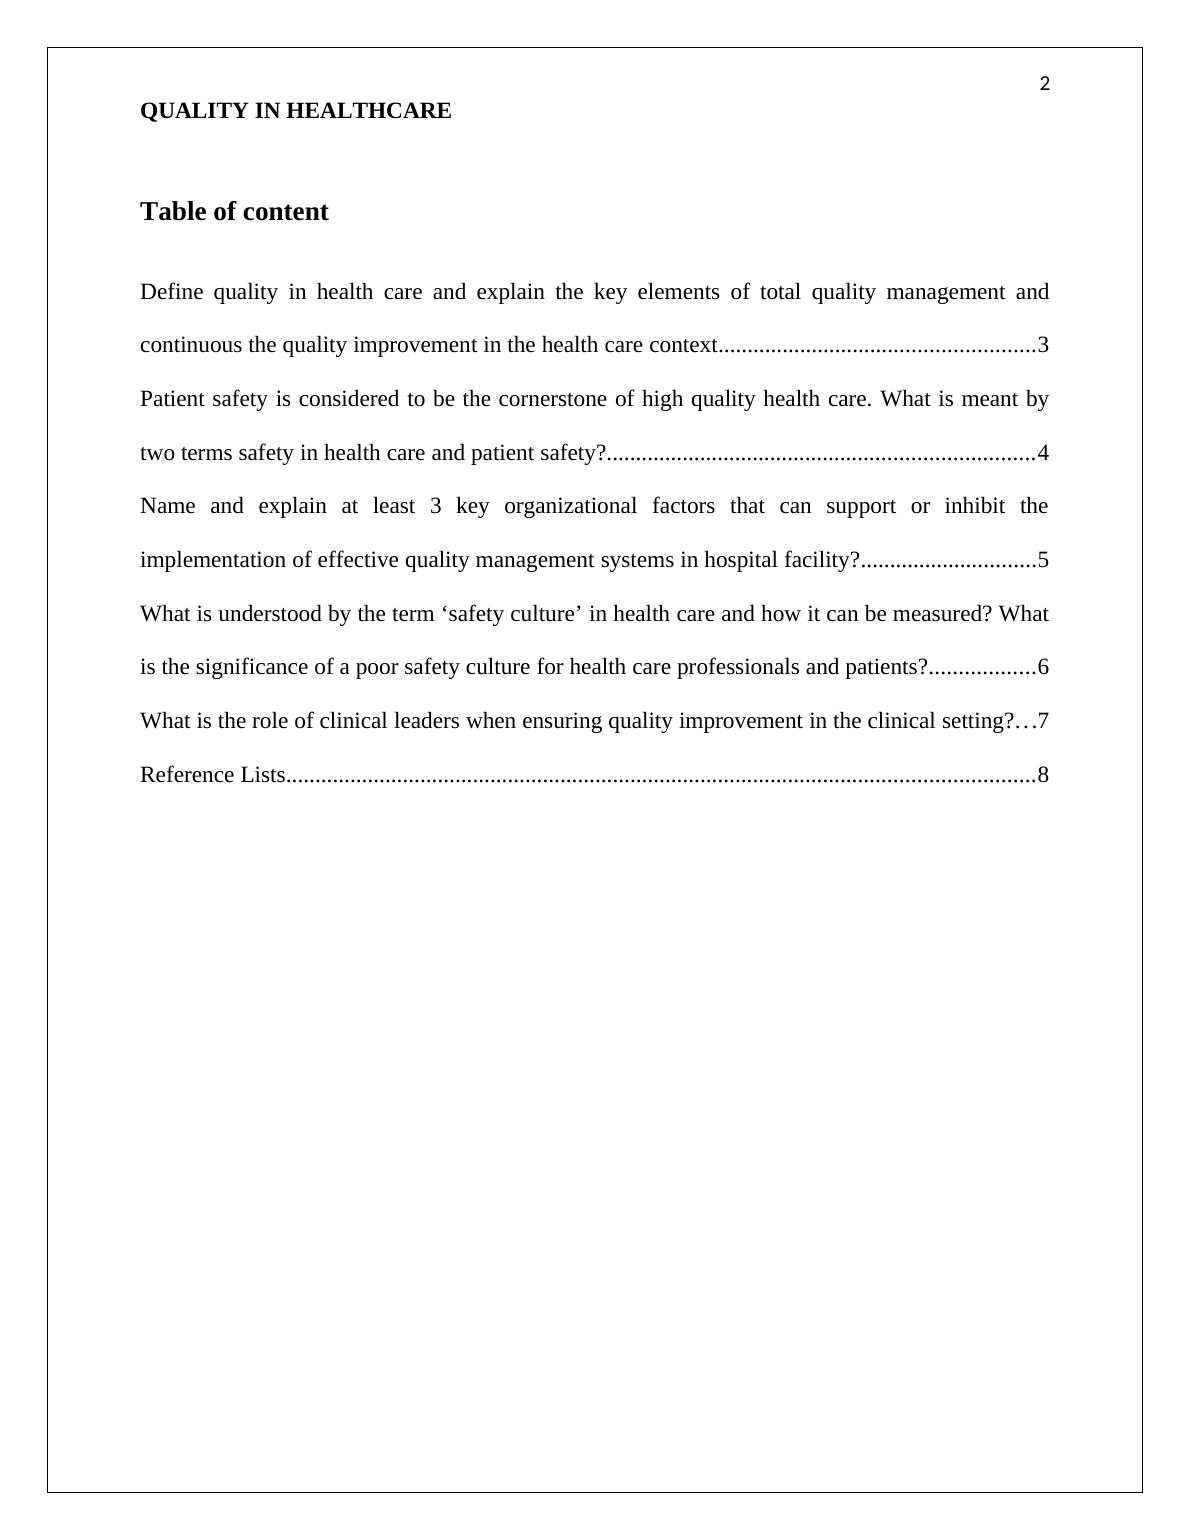 HCA 450 - Quality Management in Health Care Assignment_2